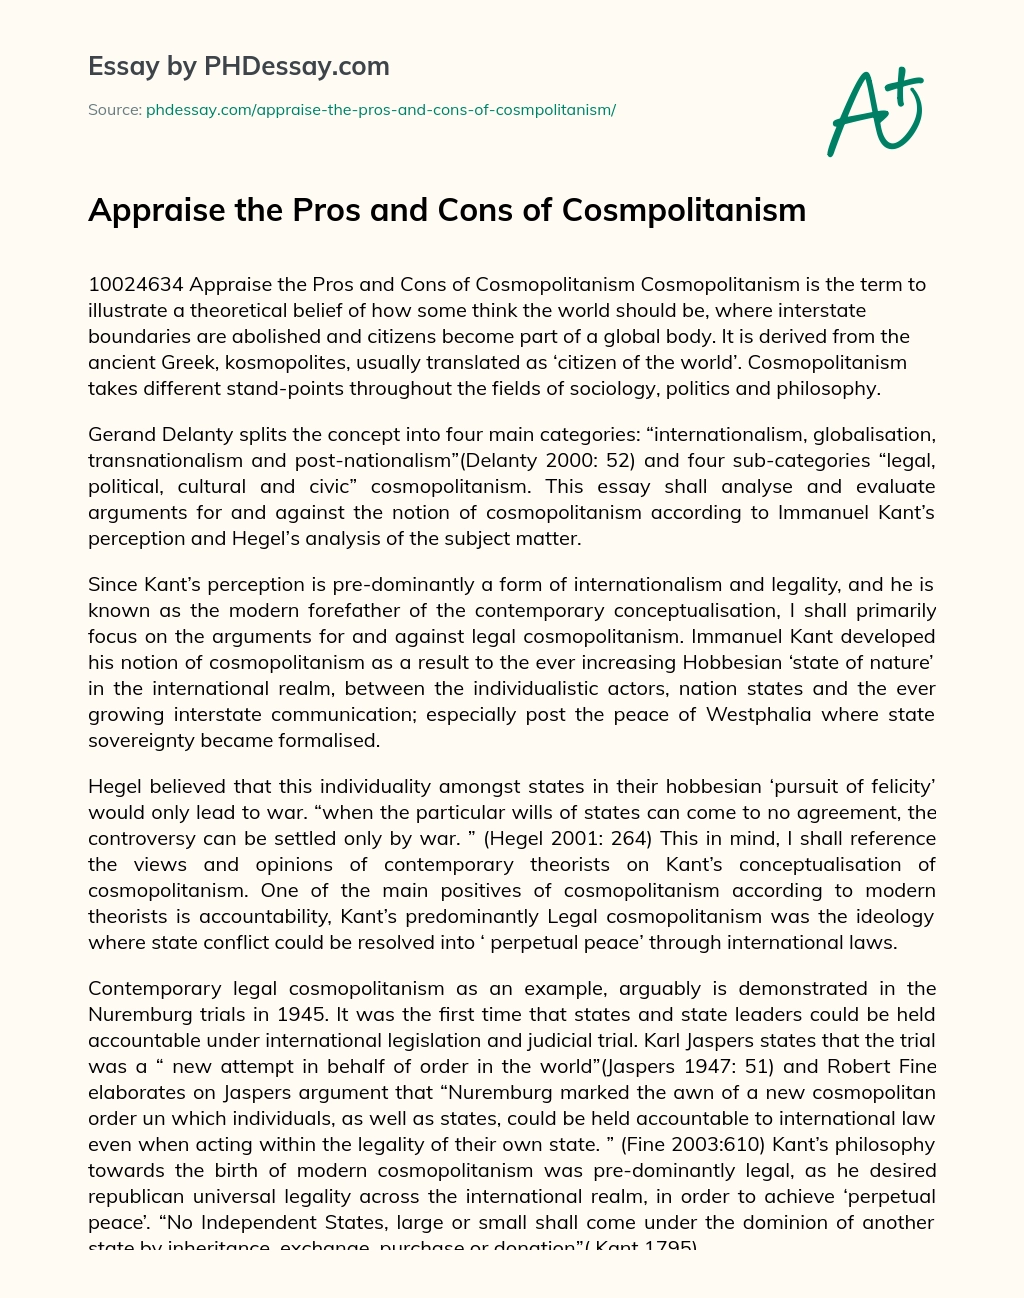 Appraise the Pros and Cons of Cosmpolitanism essay